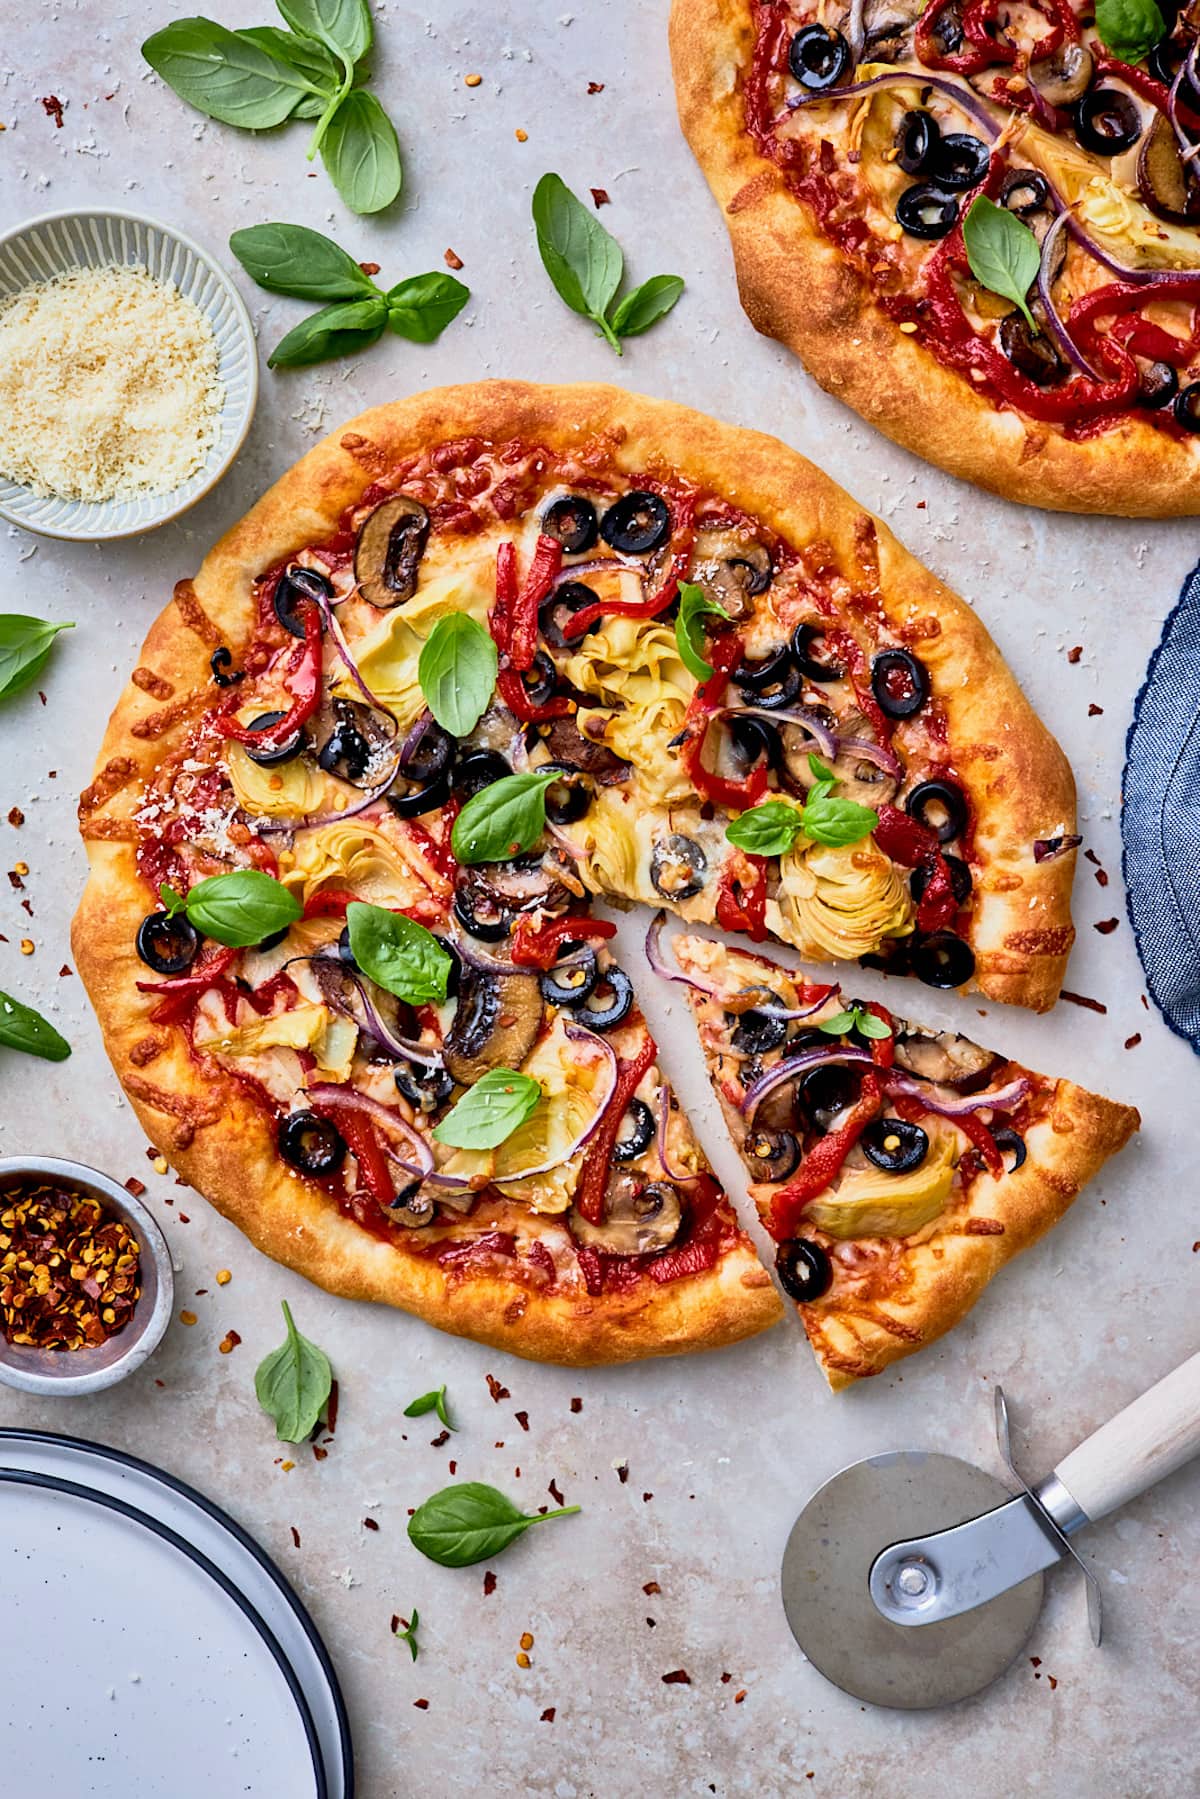 10 Tips for Making the Best Pizza Ever